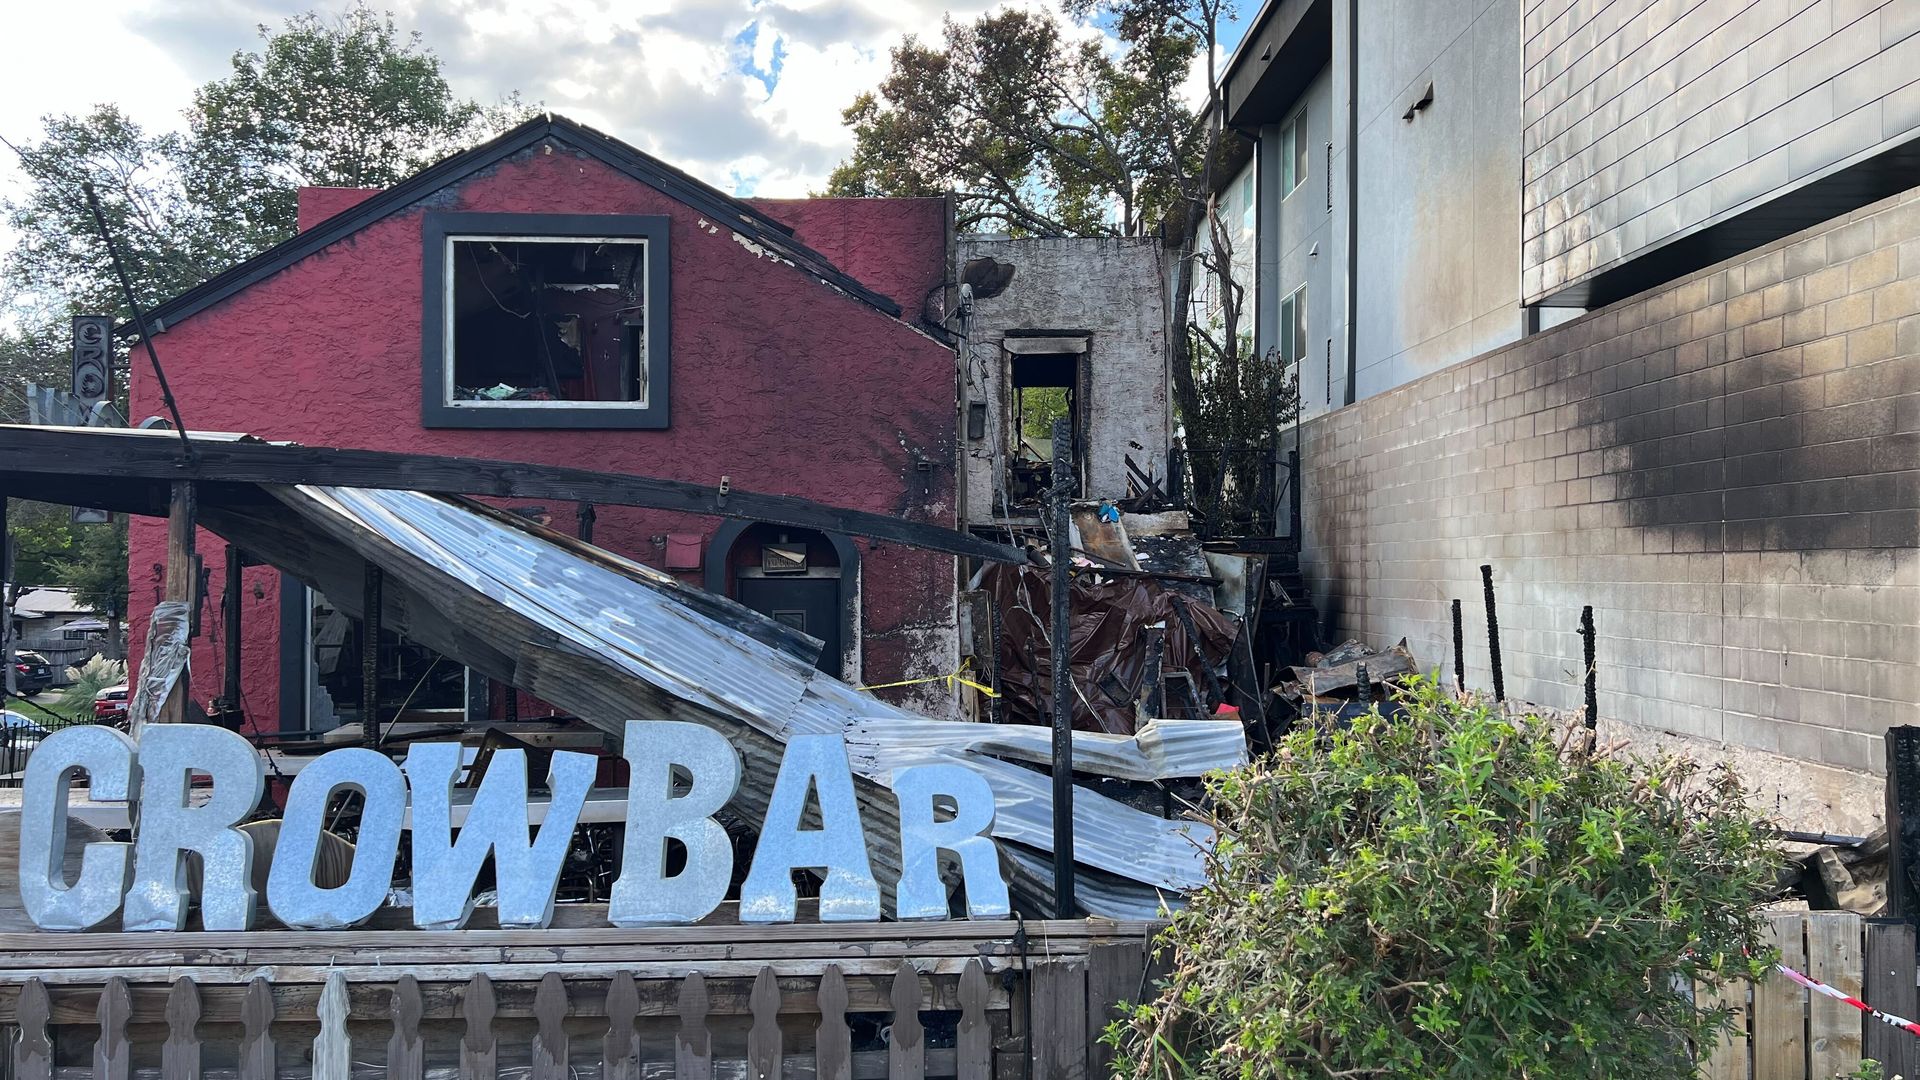 A photograph of the bar Crow Bar, destroyed by fire.